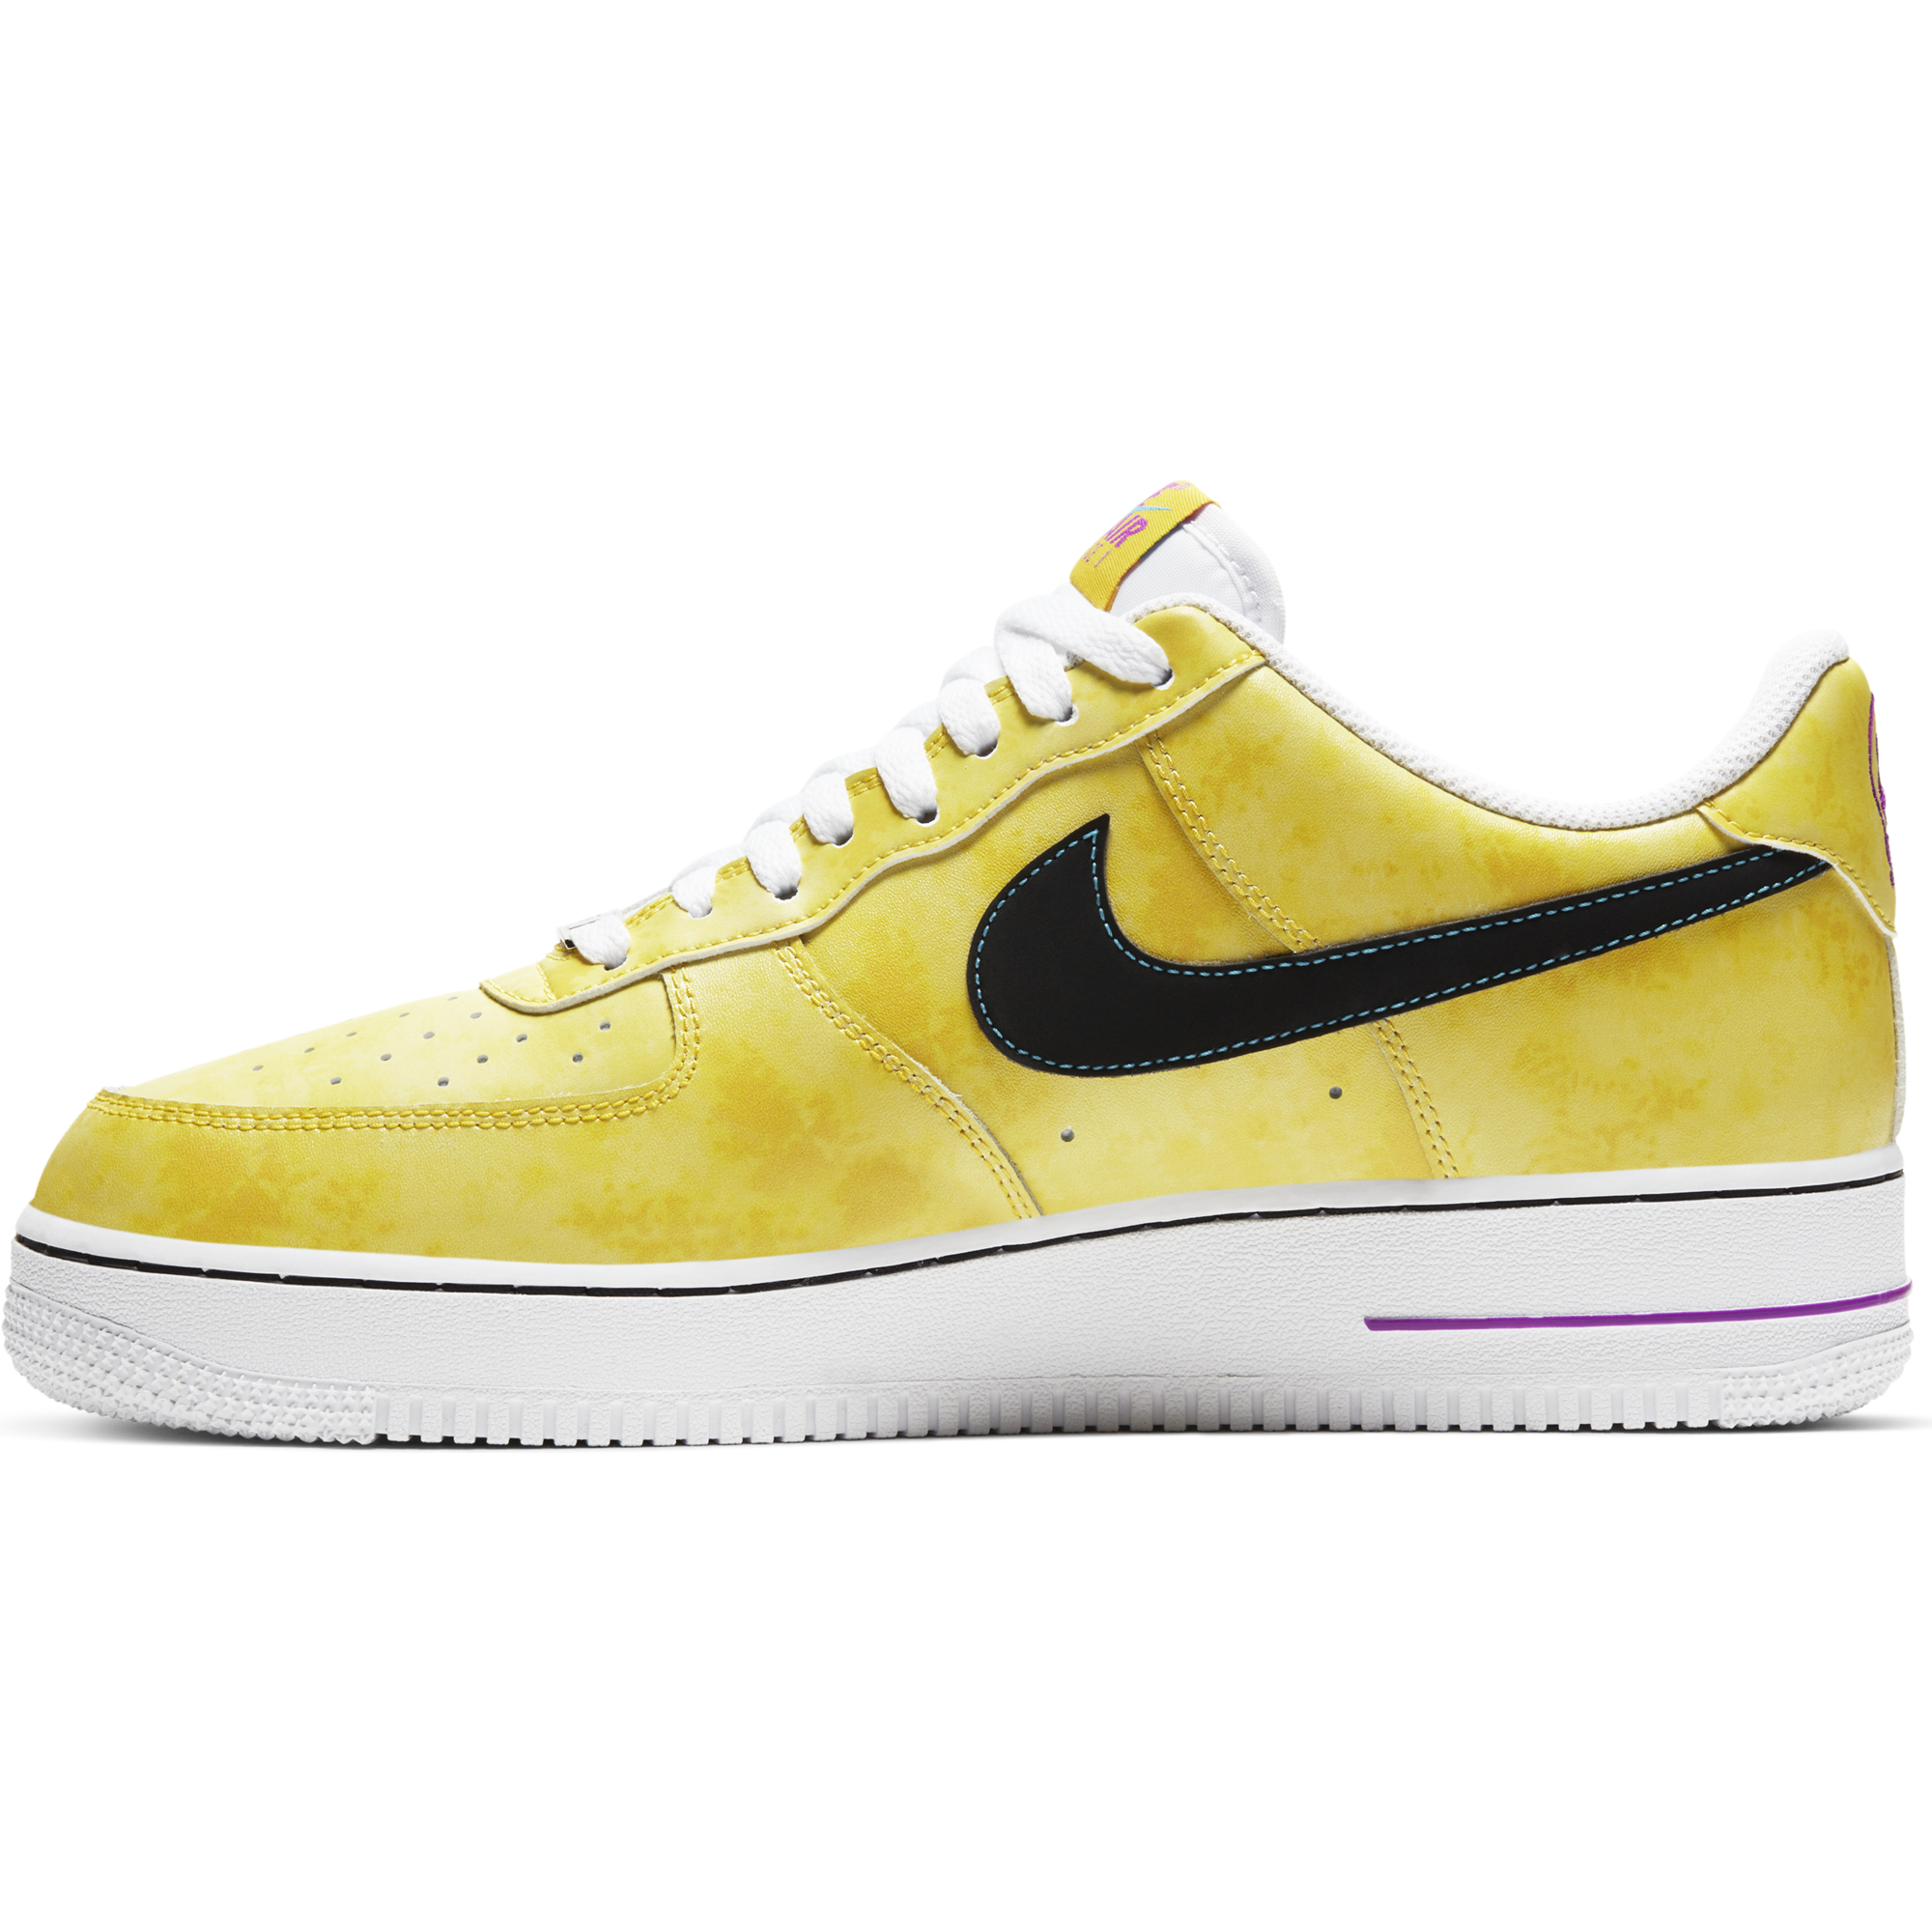 yellow air force 1 07 lv8 1 trainers